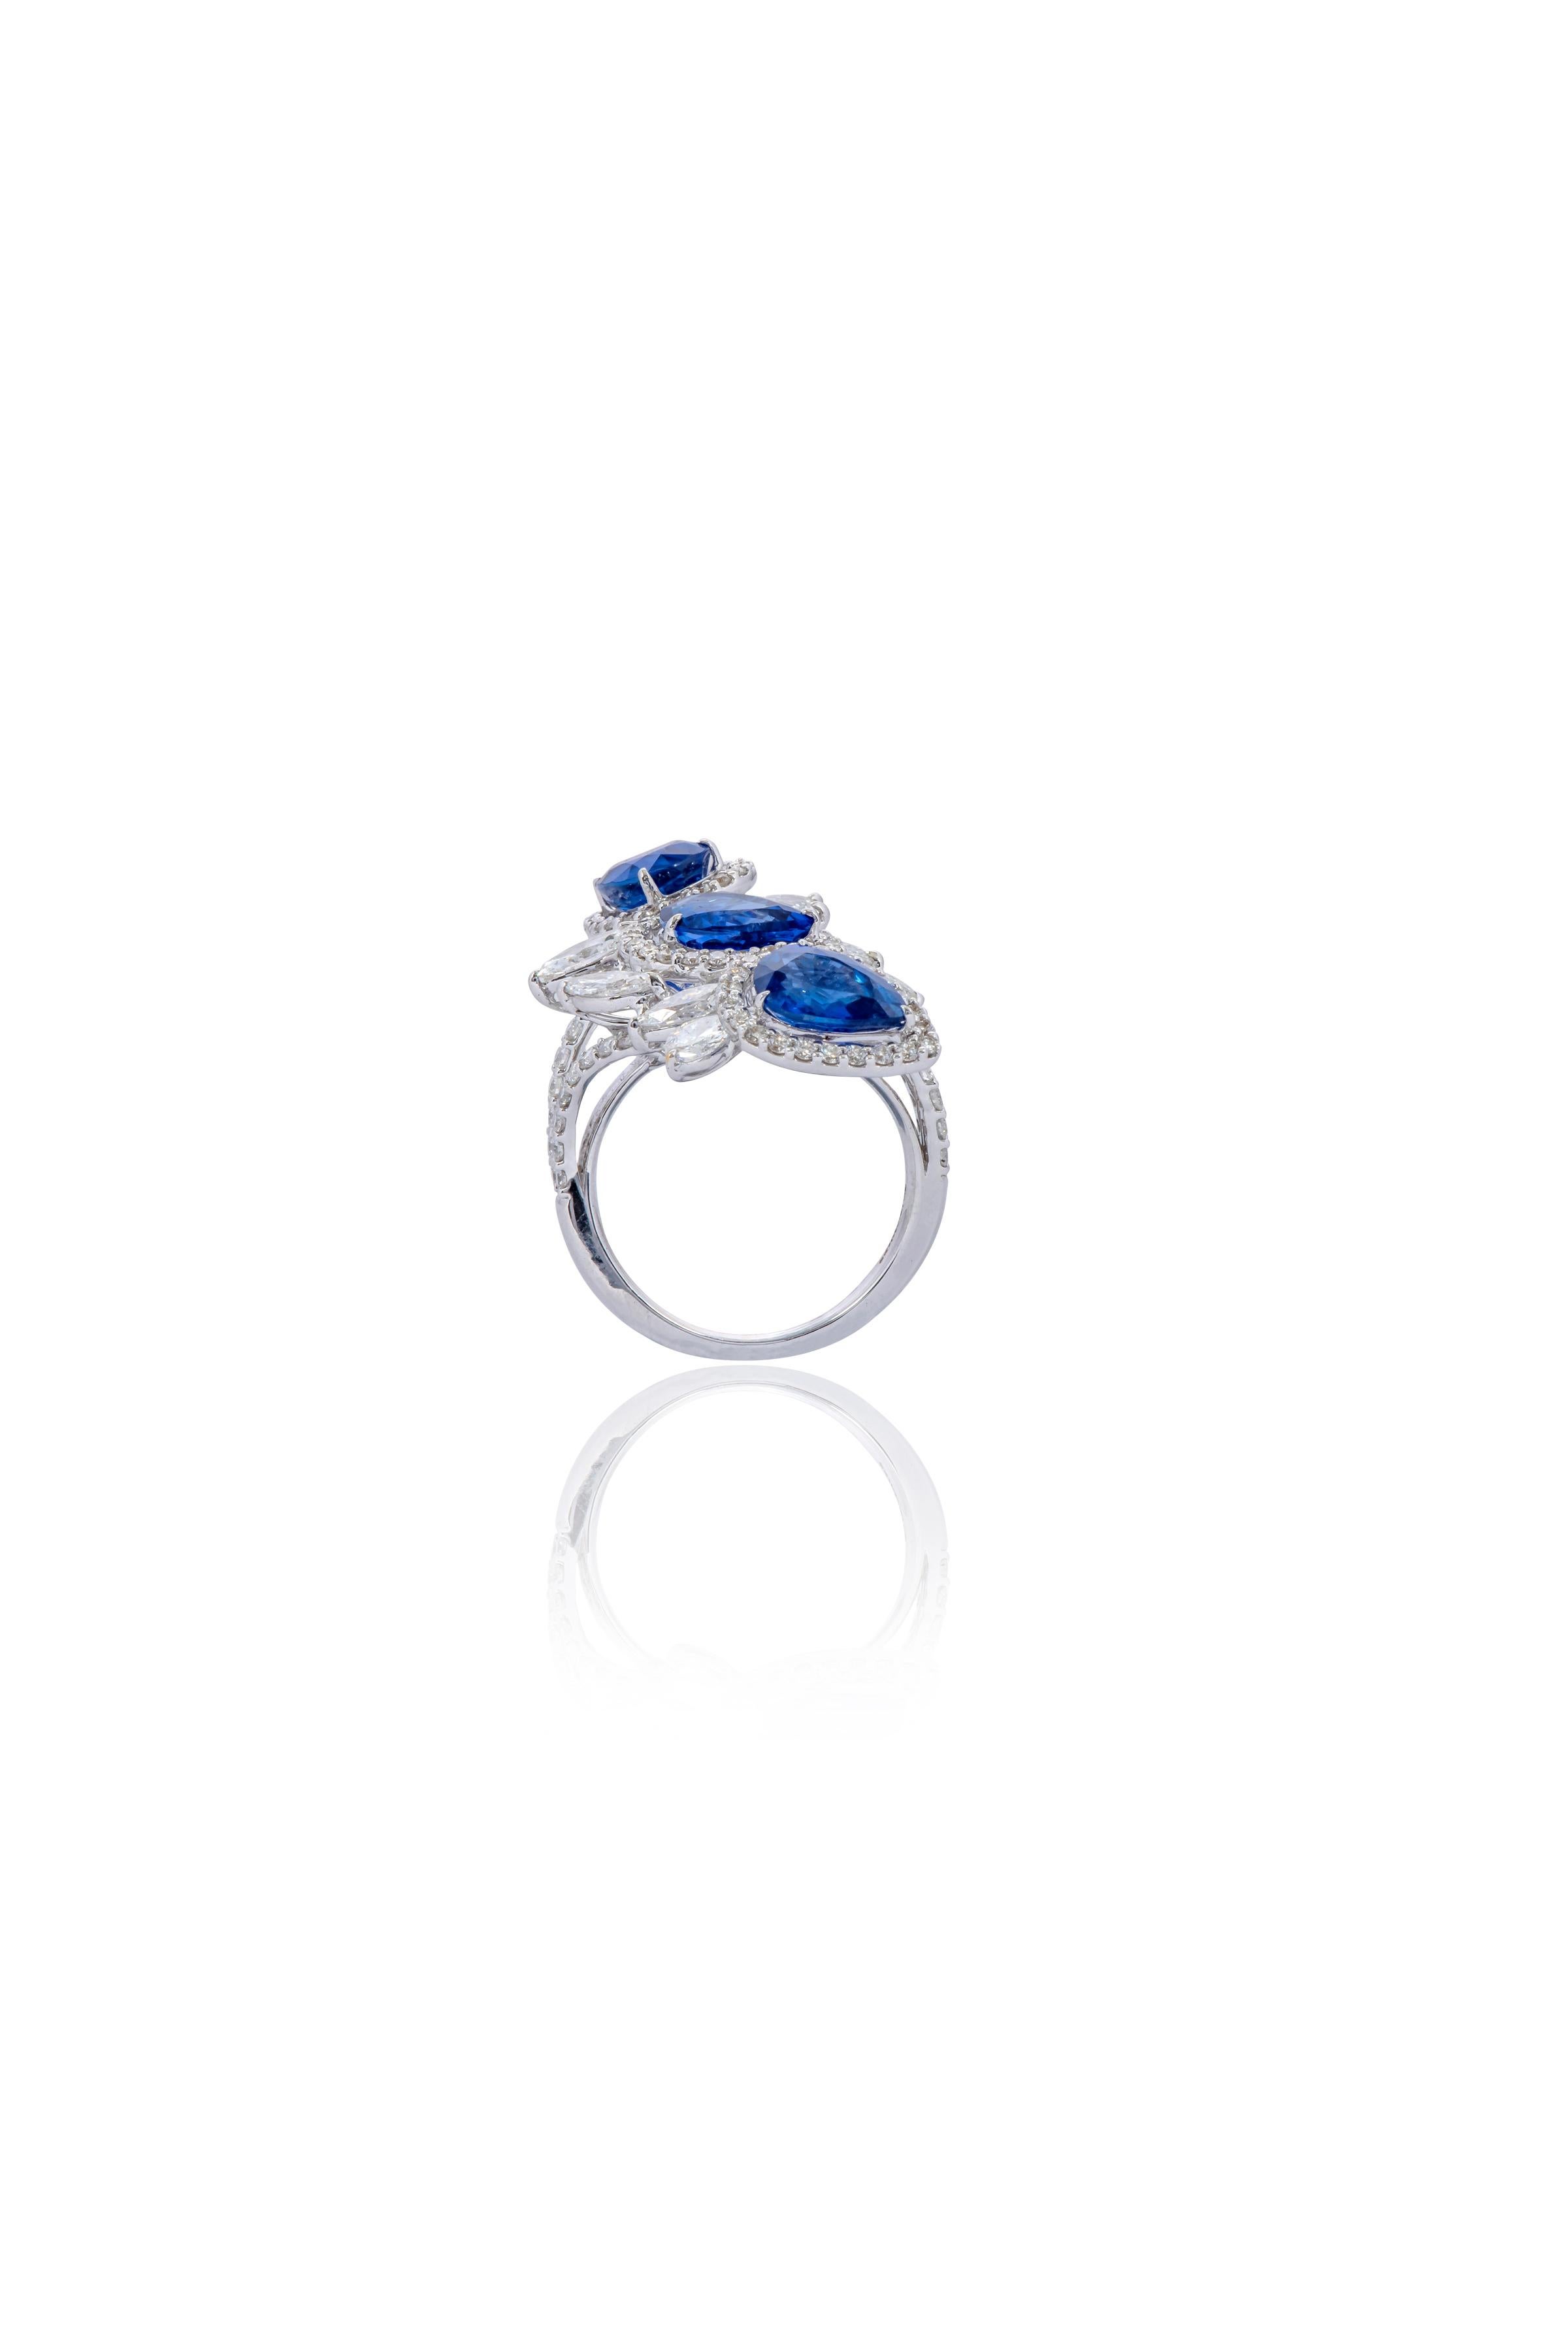 Pear Cut 18 Karat White Gold 5.43 Carat Sapphire and Diamond Cocktail Ring For Sale